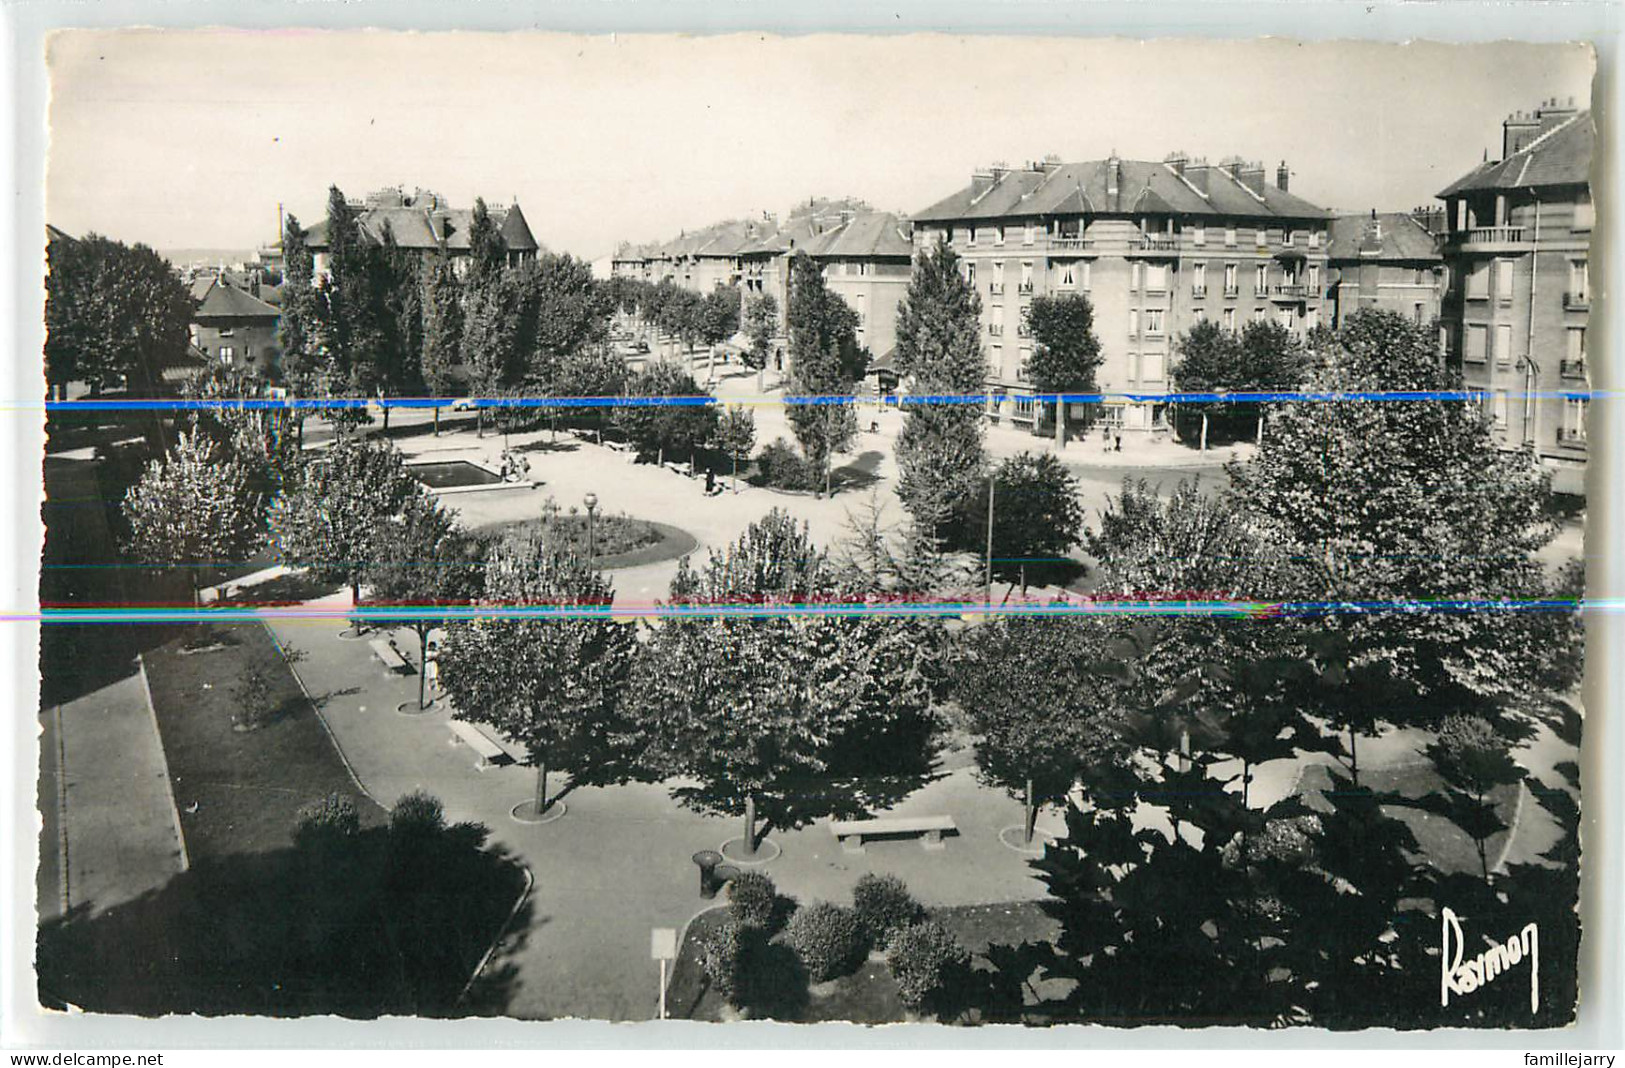 30169 - STAINS - CPSM - LA PLACE POINTET - Stains